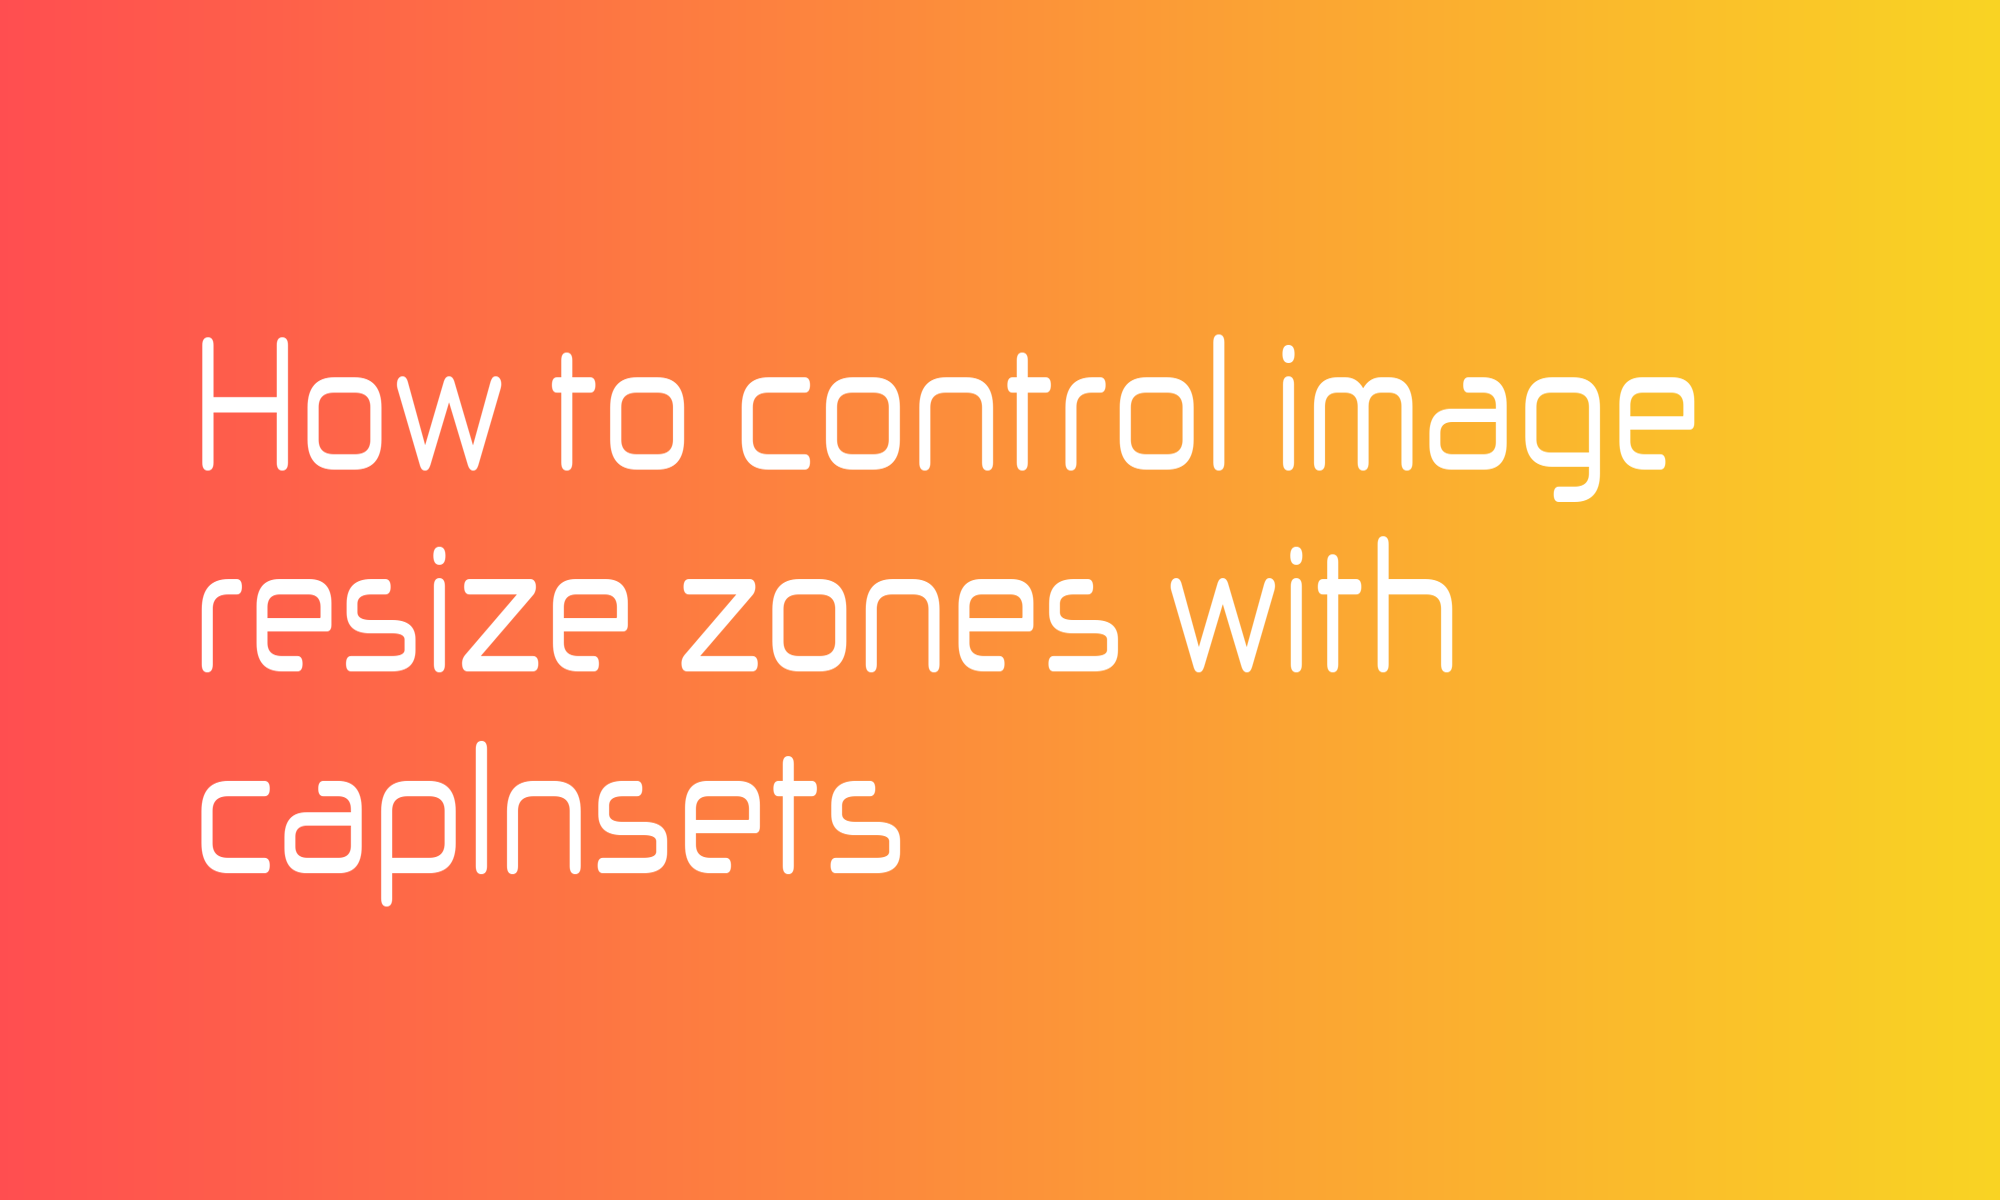 How to control image resize zones with capInsets